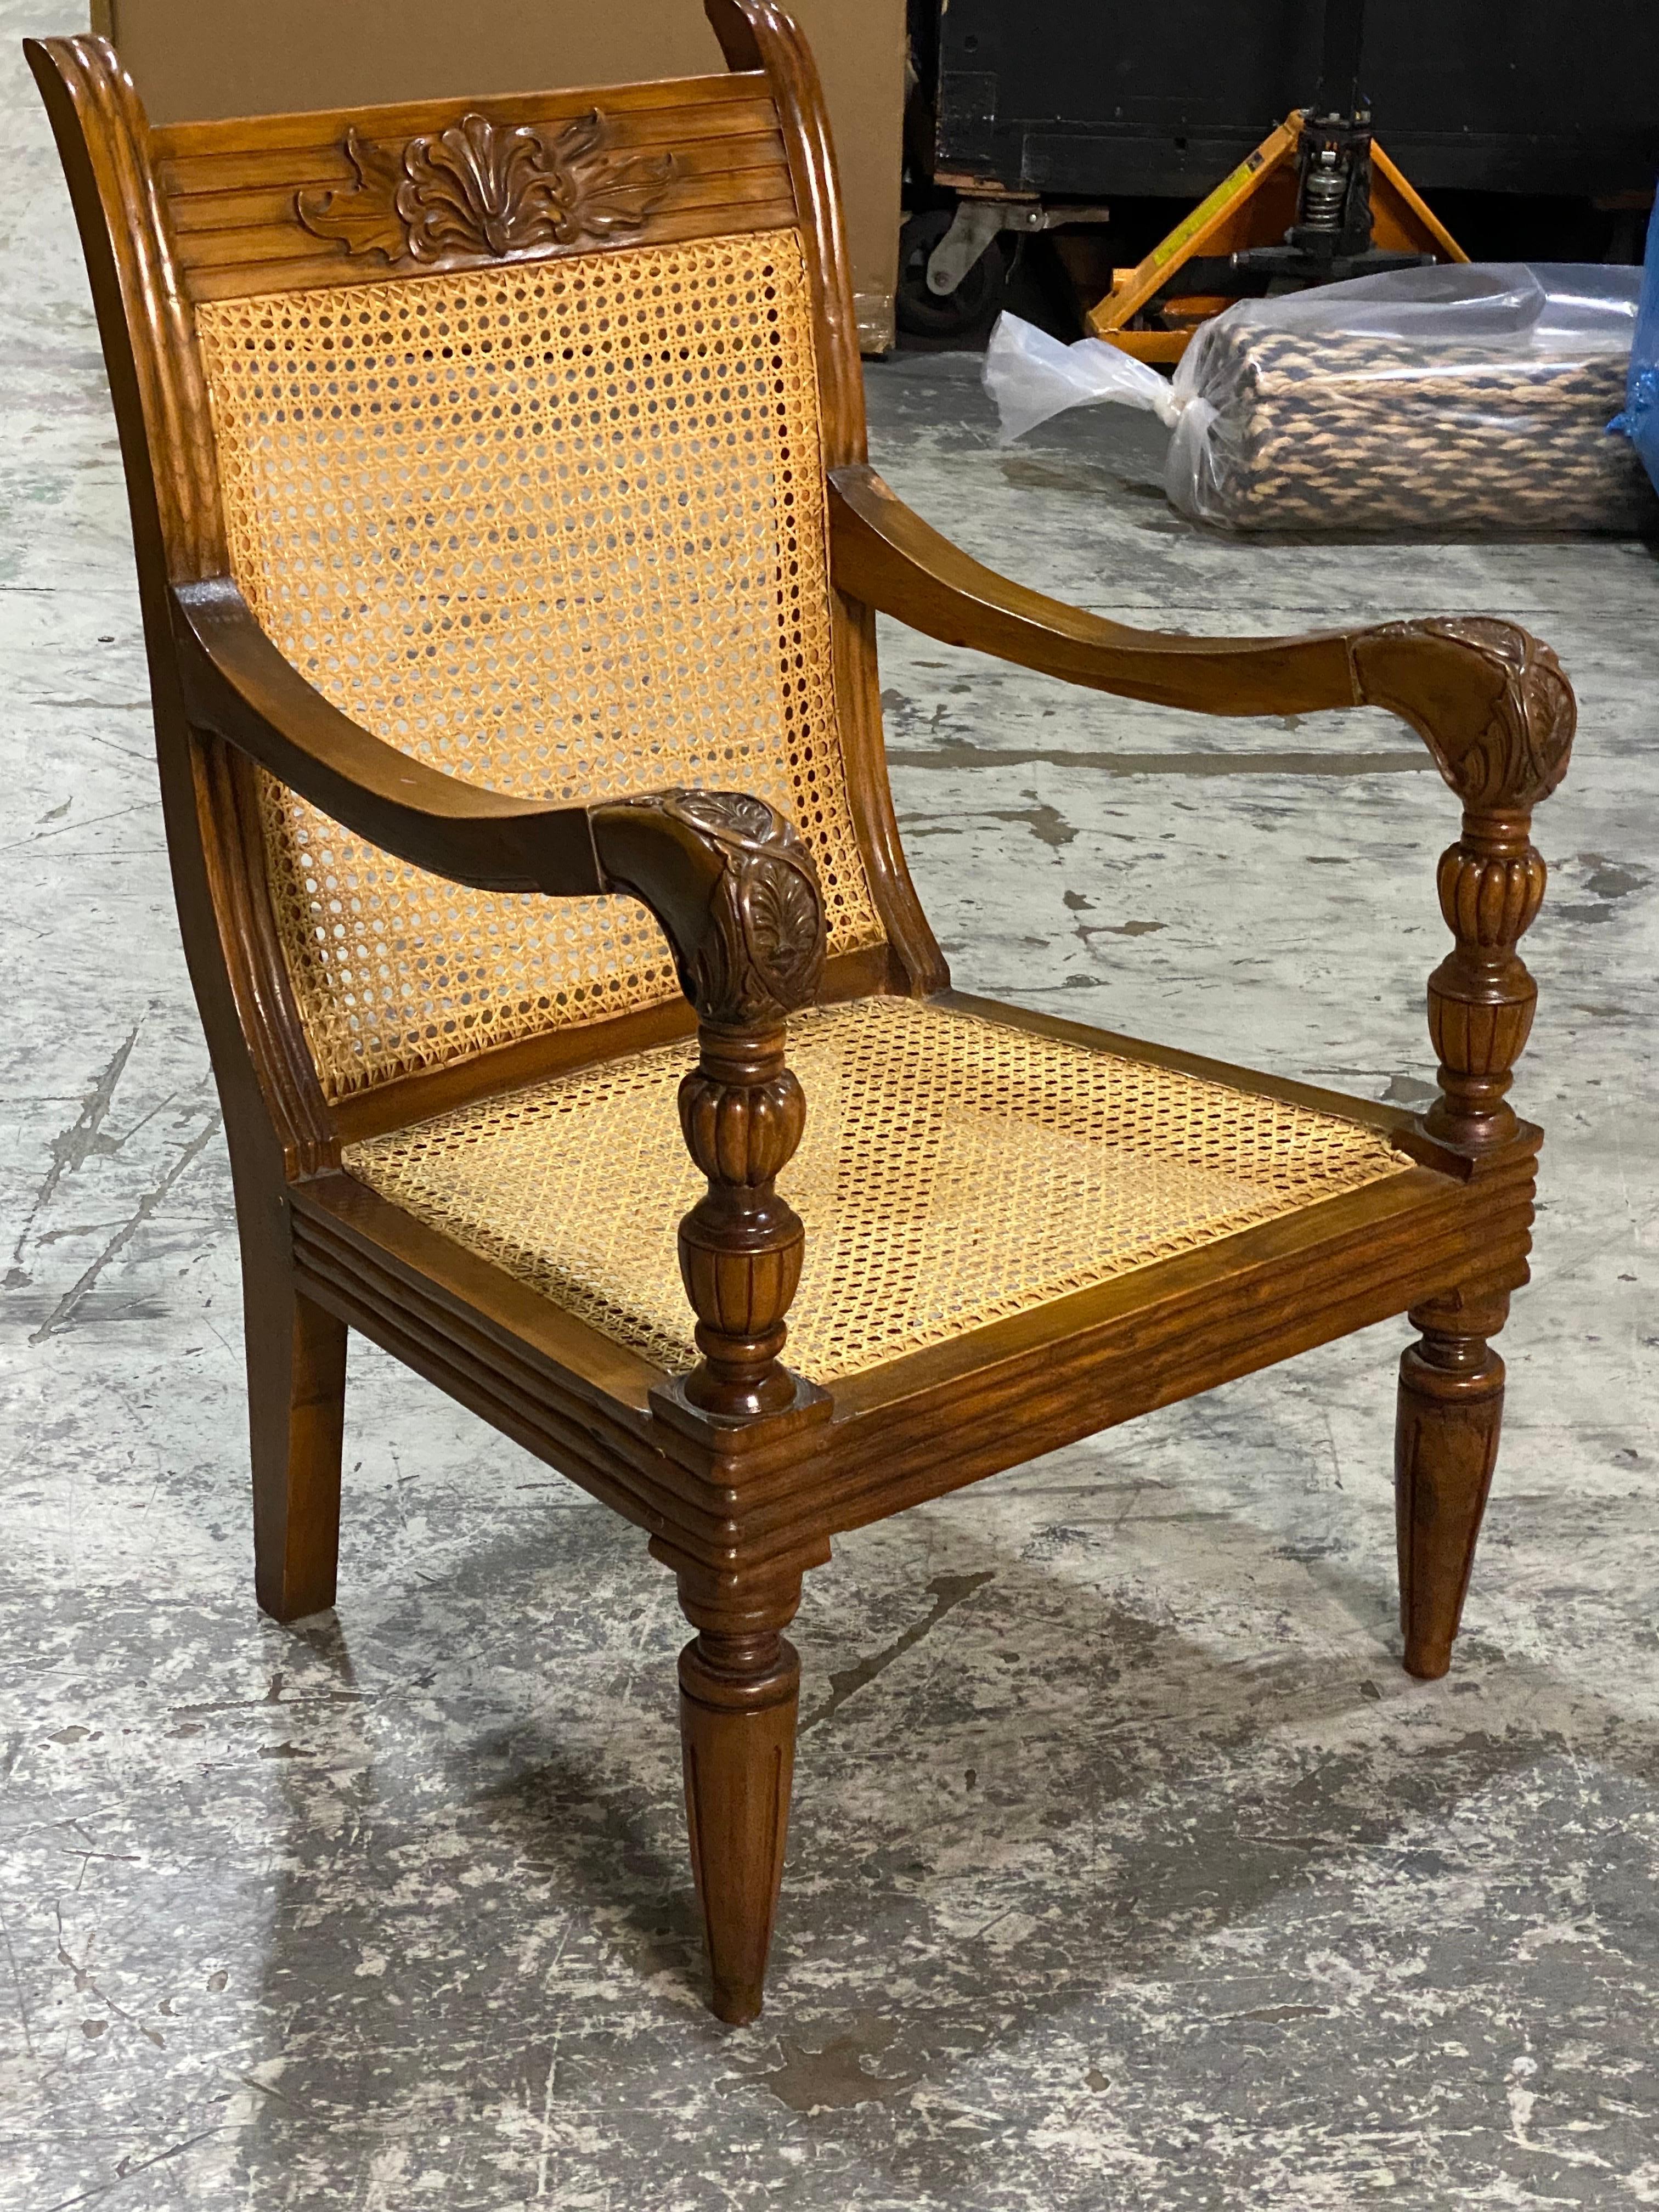 British Colonial Mahogany & Caned Armchair
A low comfortable reading chair made out of Mahogany and cane. Lovely carved details on arms, back, and legs. Reeded wood details along the seat frame. Hand caned. Comes with cushion unless otherwise